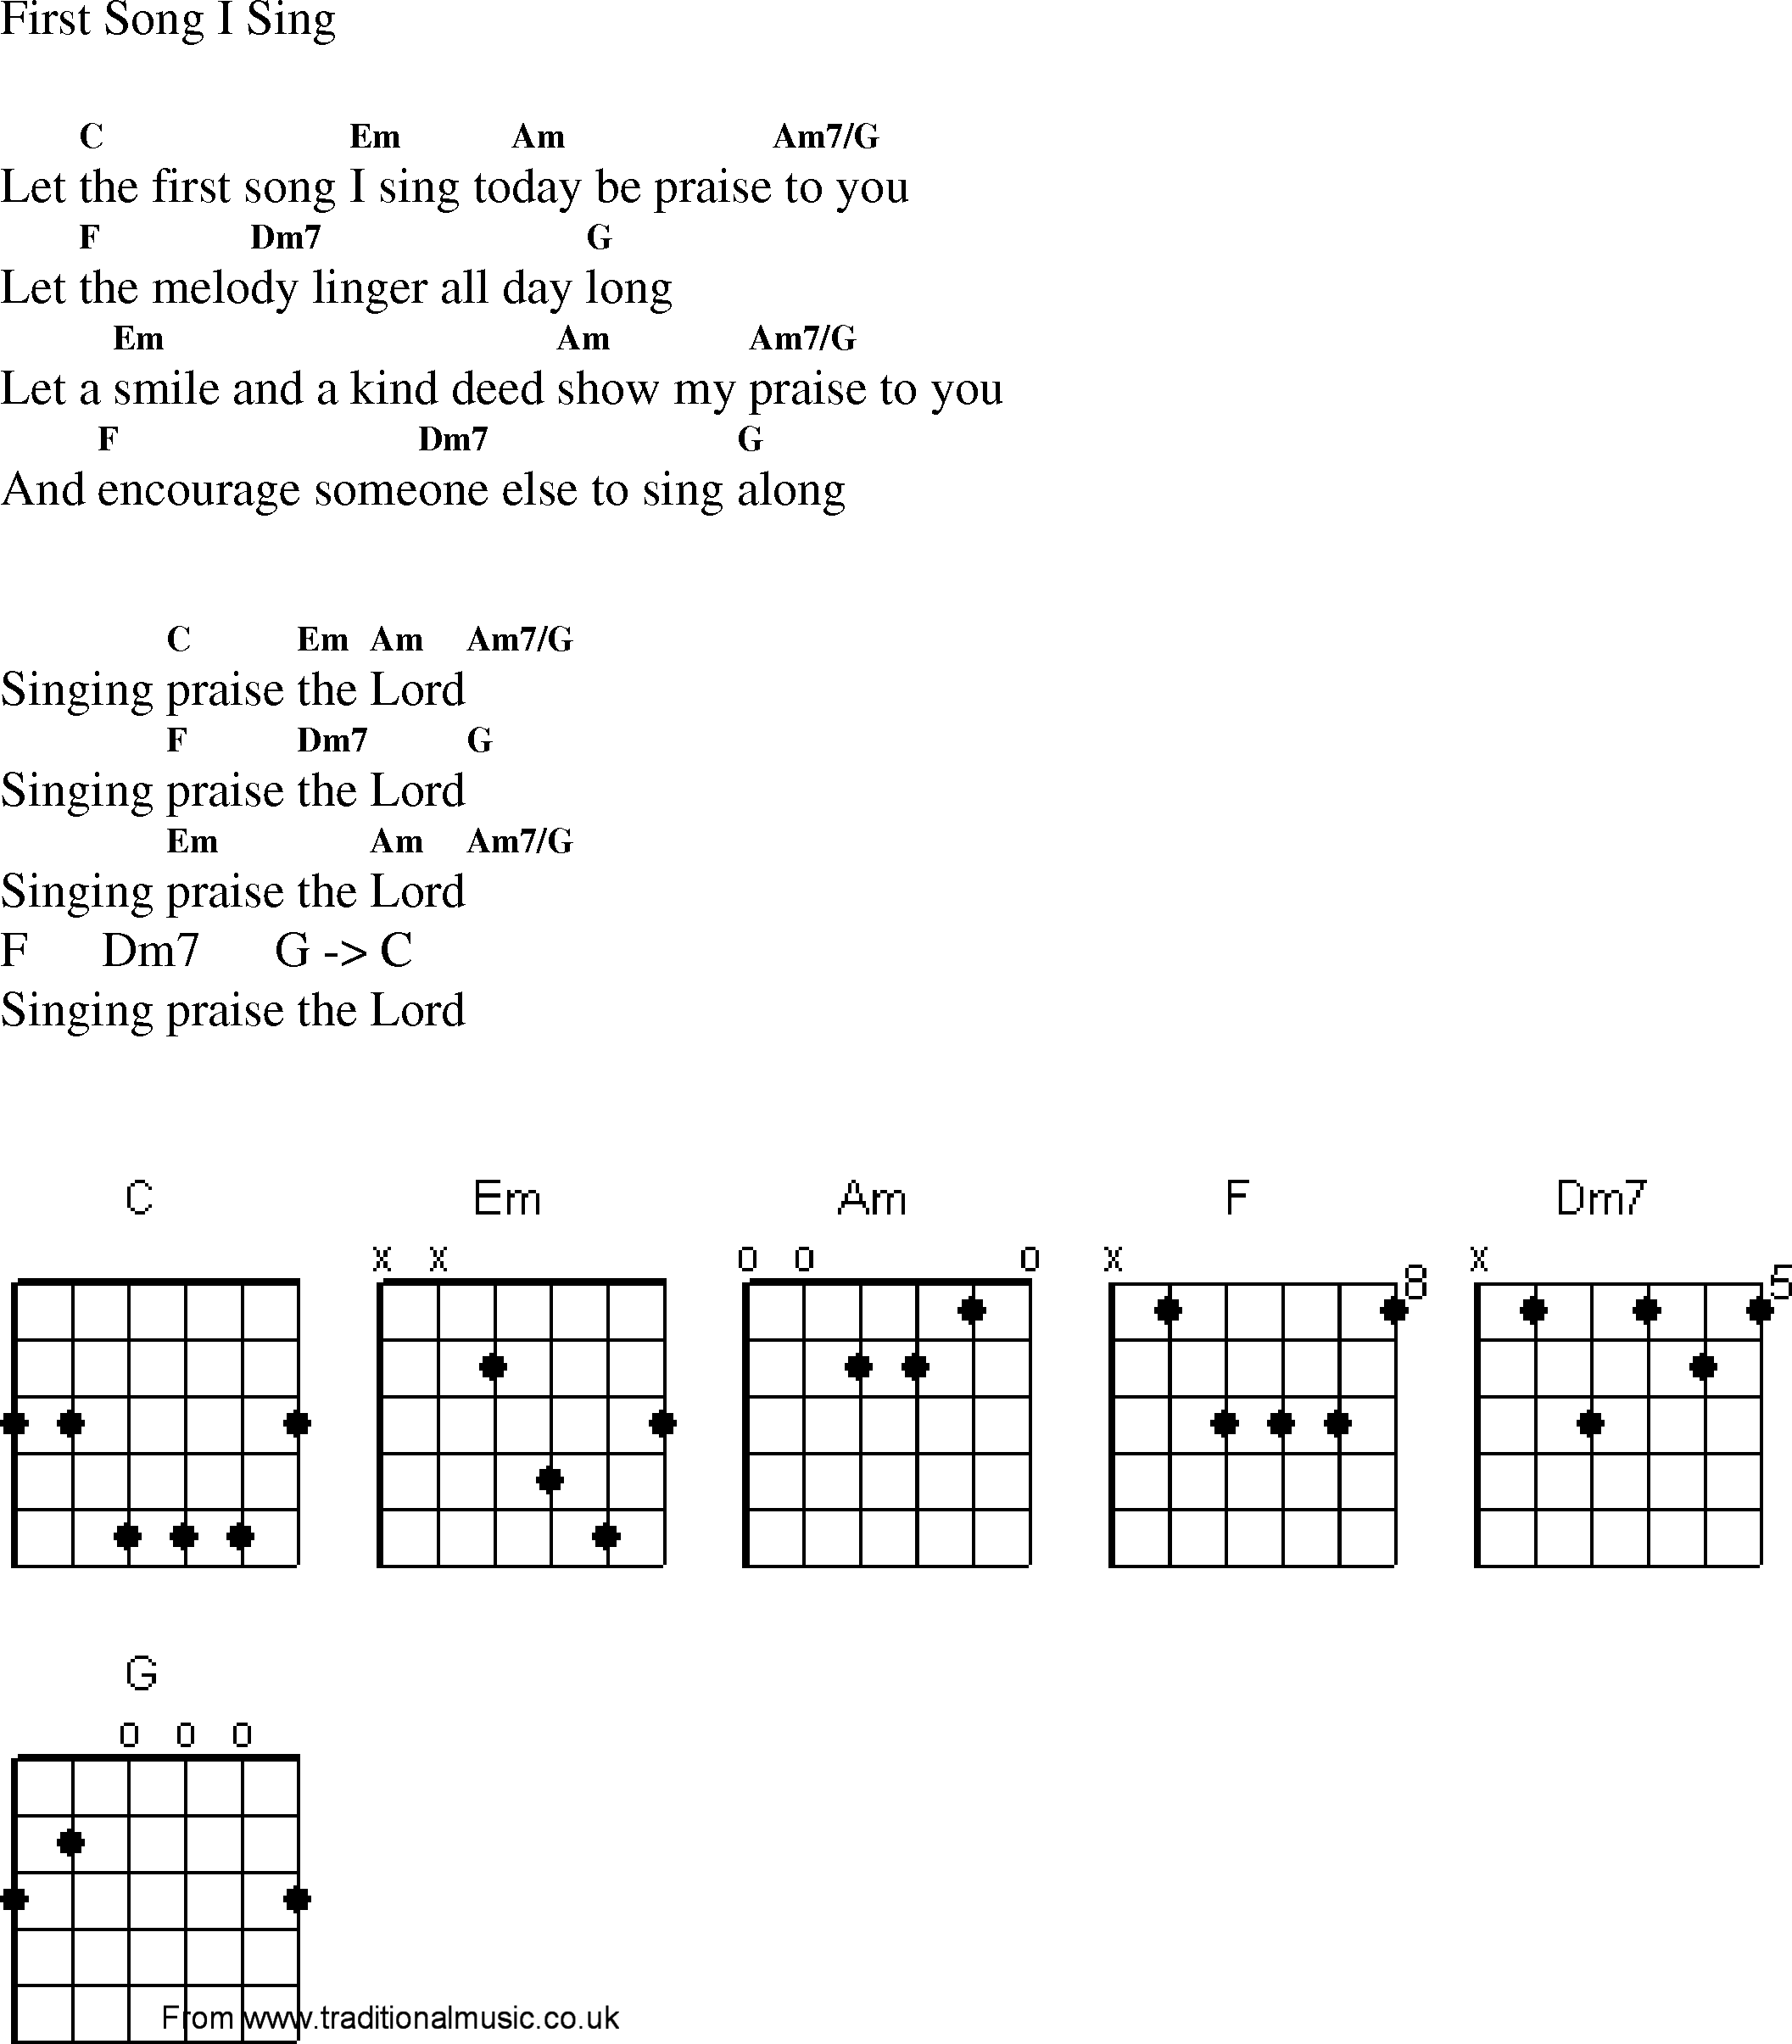 Gospel Song: first_song_i_sing, lyrics and chords.